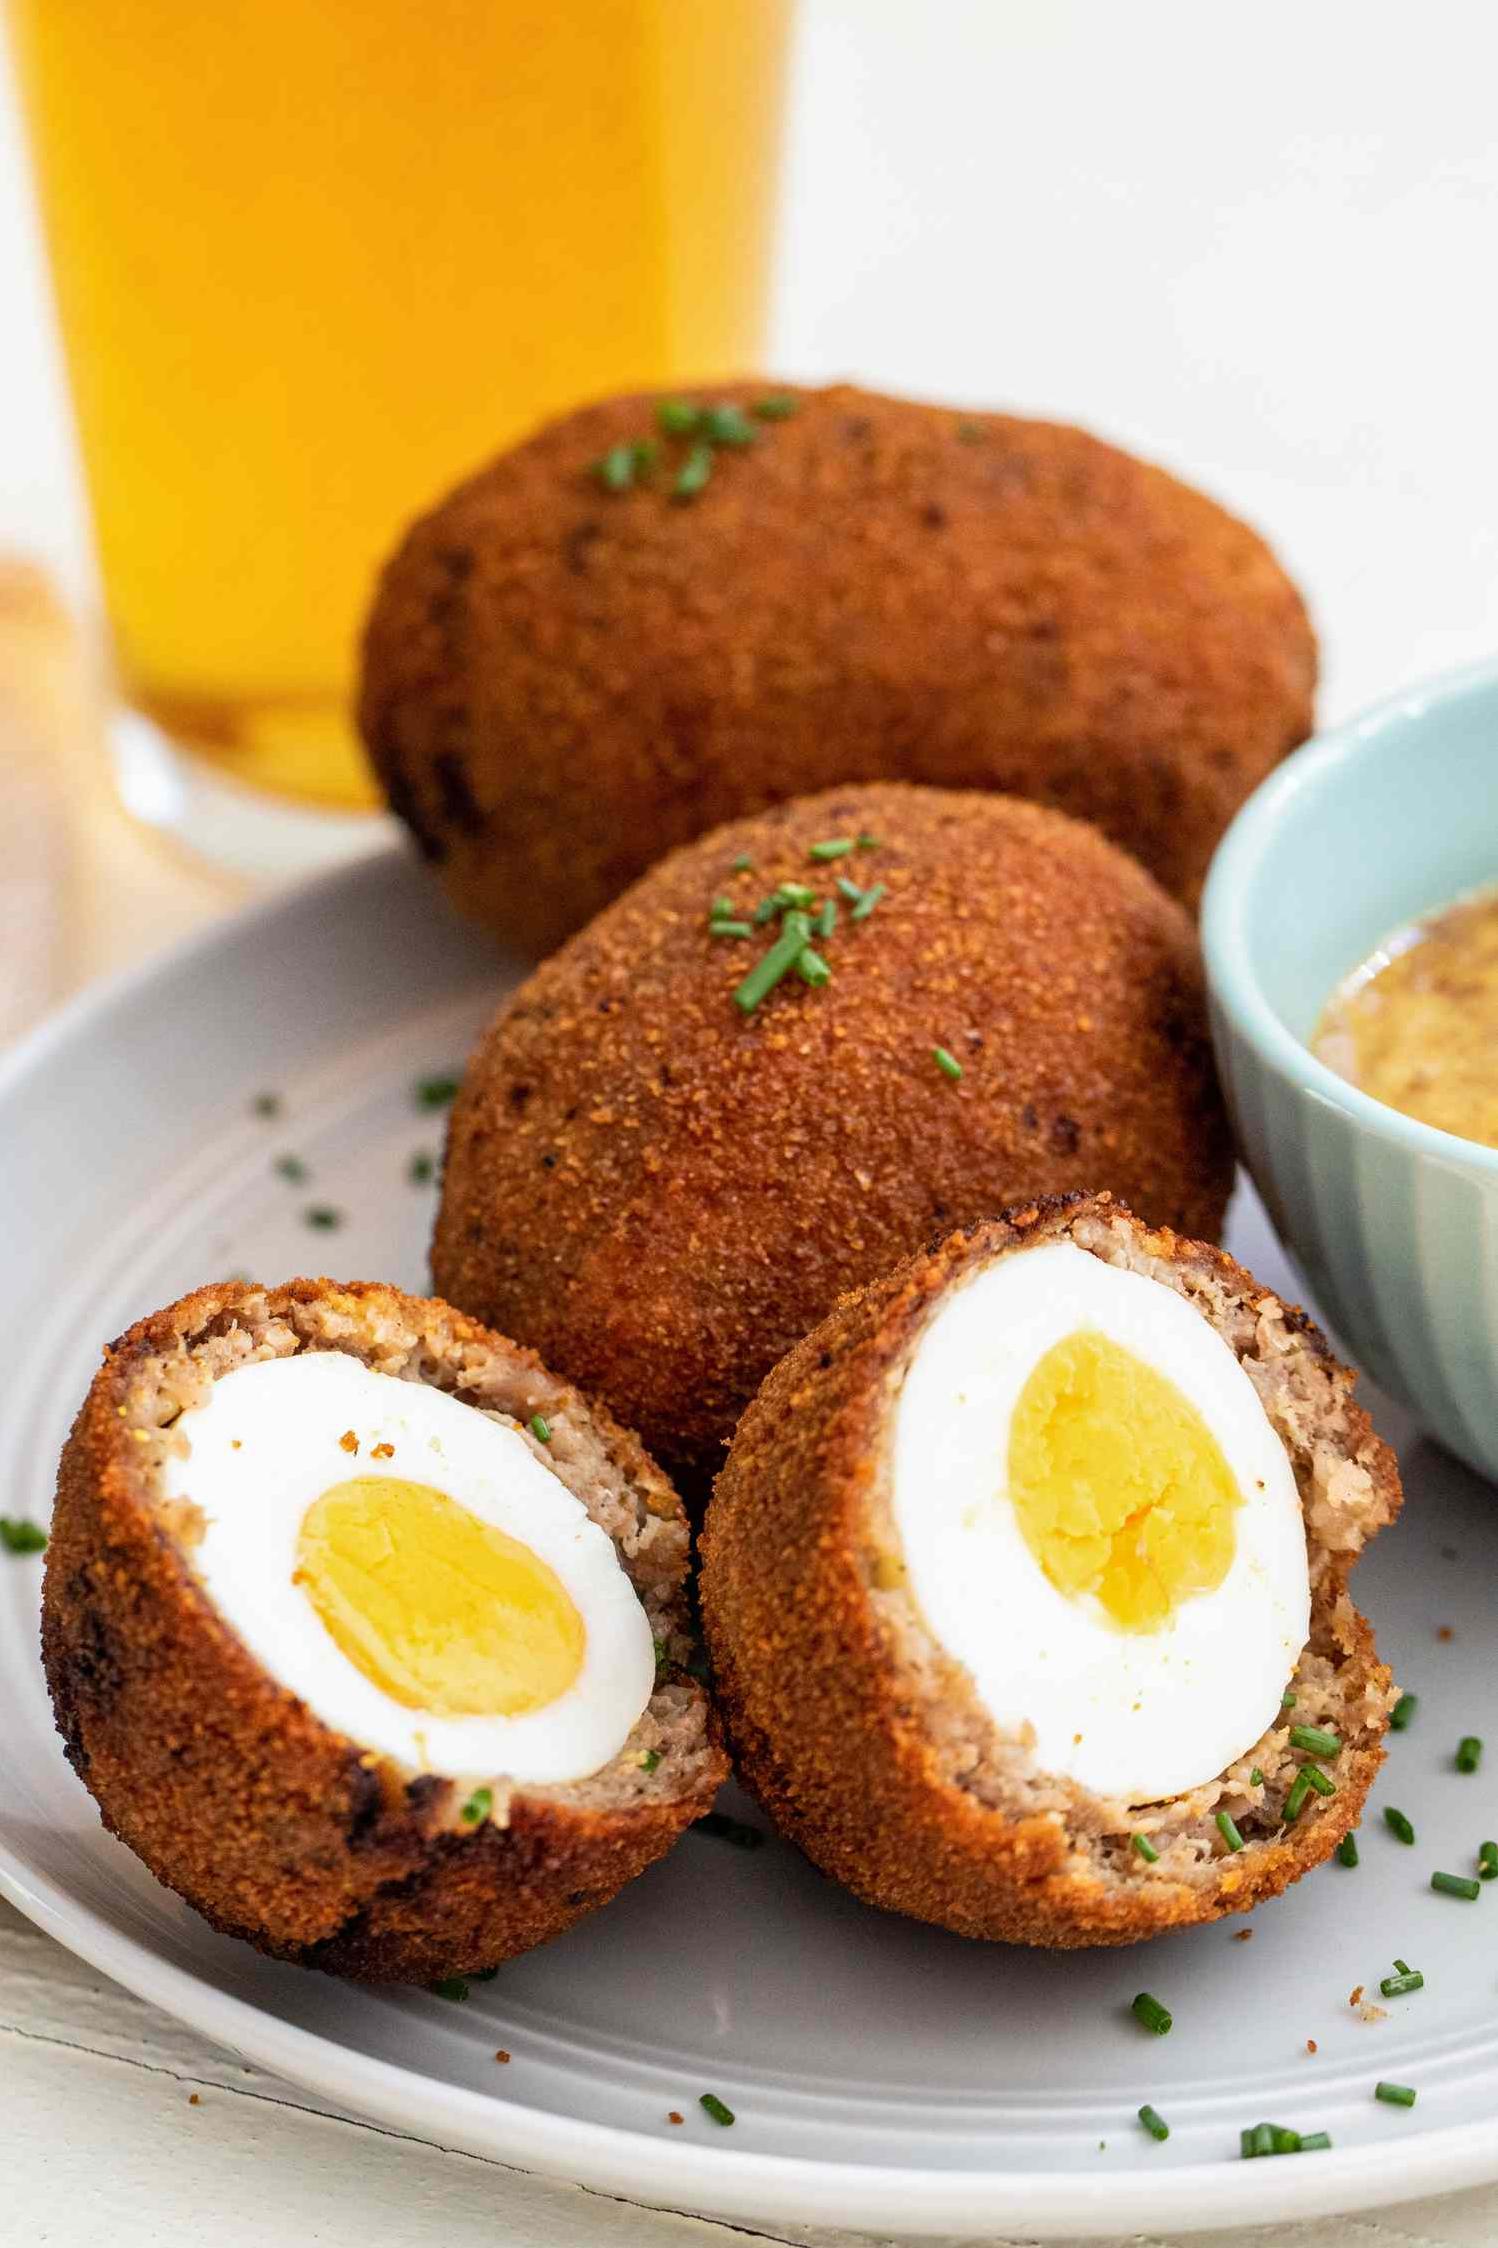  These Hot Scotch Eggs are perfect for breakfast, brunch or as a snack!